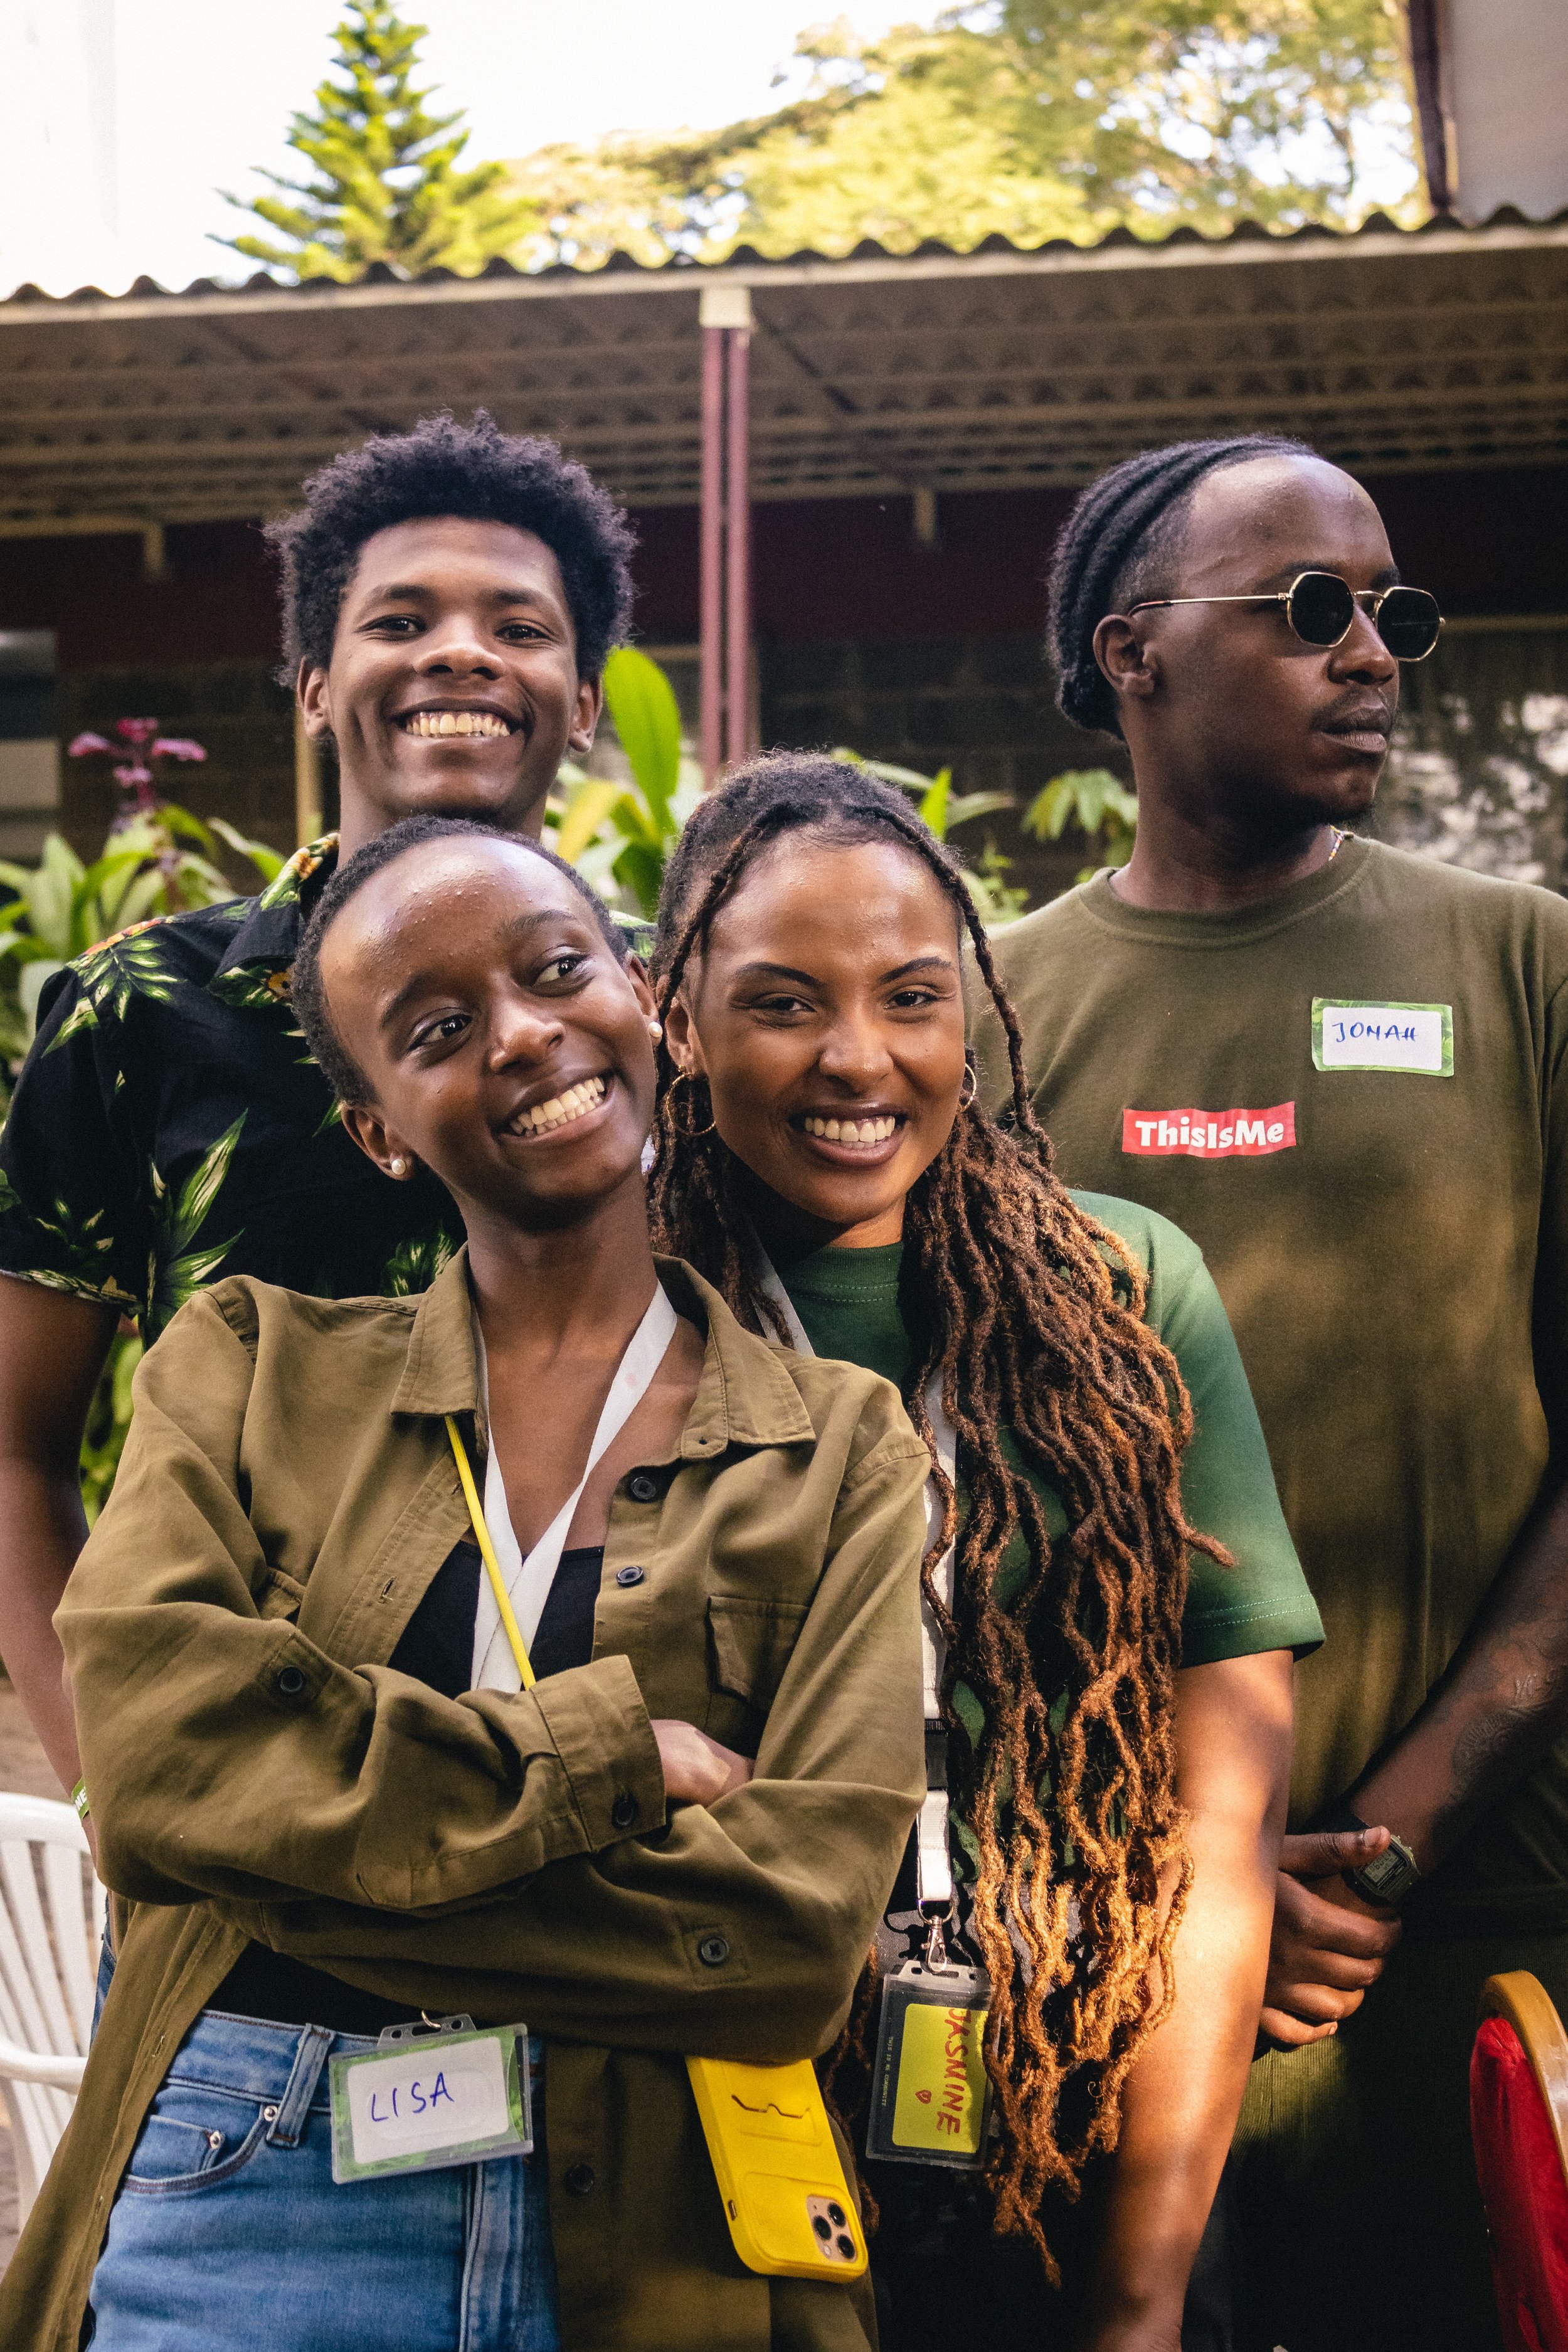 How ThisIsMe Community Is Powering The Youth Revolution in Kenya — Kenga